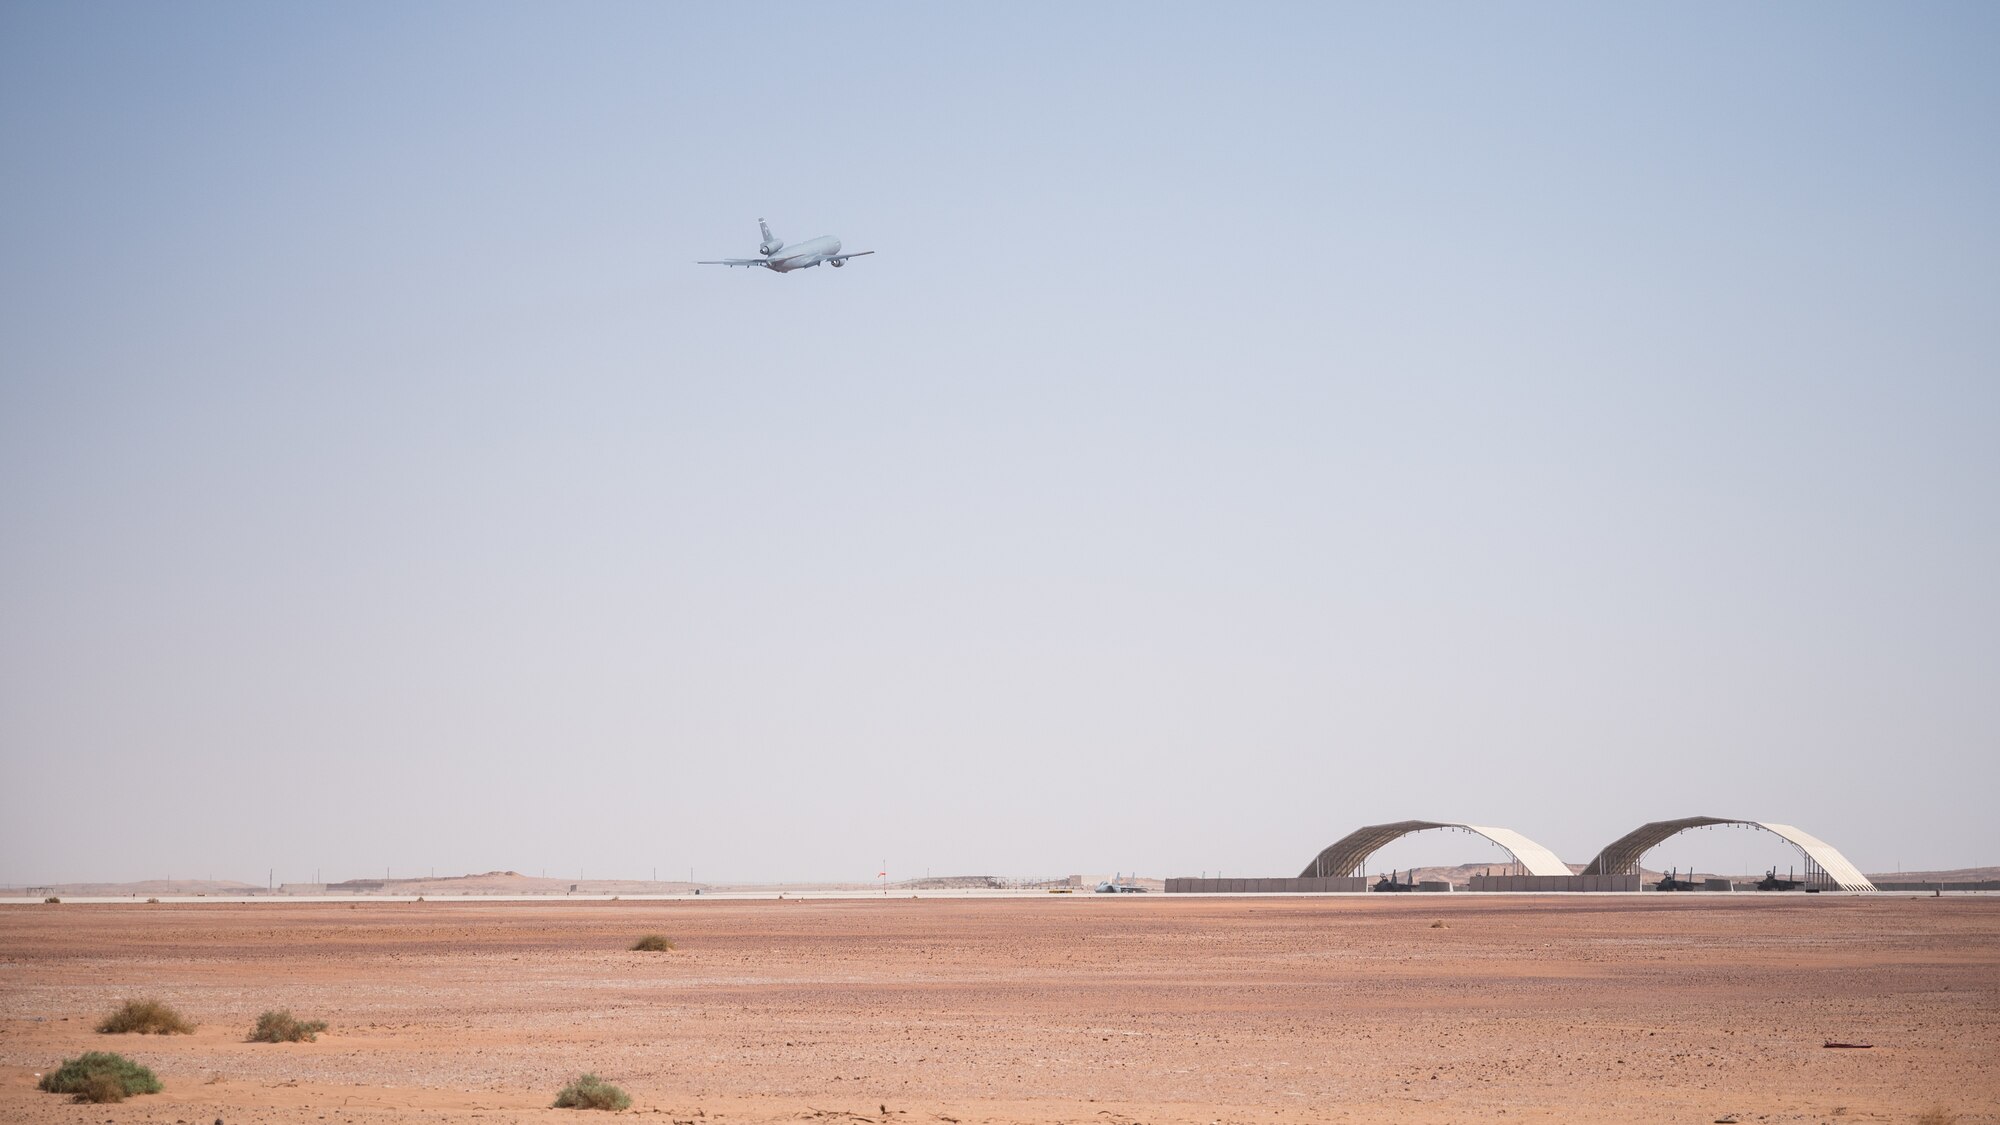 A U.S. Air Force KC-10 Extender assigned to the 908th Expeditionary Air Refueling Squadron takes off from Prince Sultan Air Base, Kingdom of Saudi Arabia, March 3, 2022. This is the first combat mission flown by the 908th EARS after relocating from Al Dhafra Air Base, United Arab Emirates, to PSAB where it will provide global reach aerial refueling capability to support joint and partner nation aircraft throughout the U.S. Central Command area of responsibility. (U.S. Air Force photo by Senior Airman Jacob B. Wrightsman)